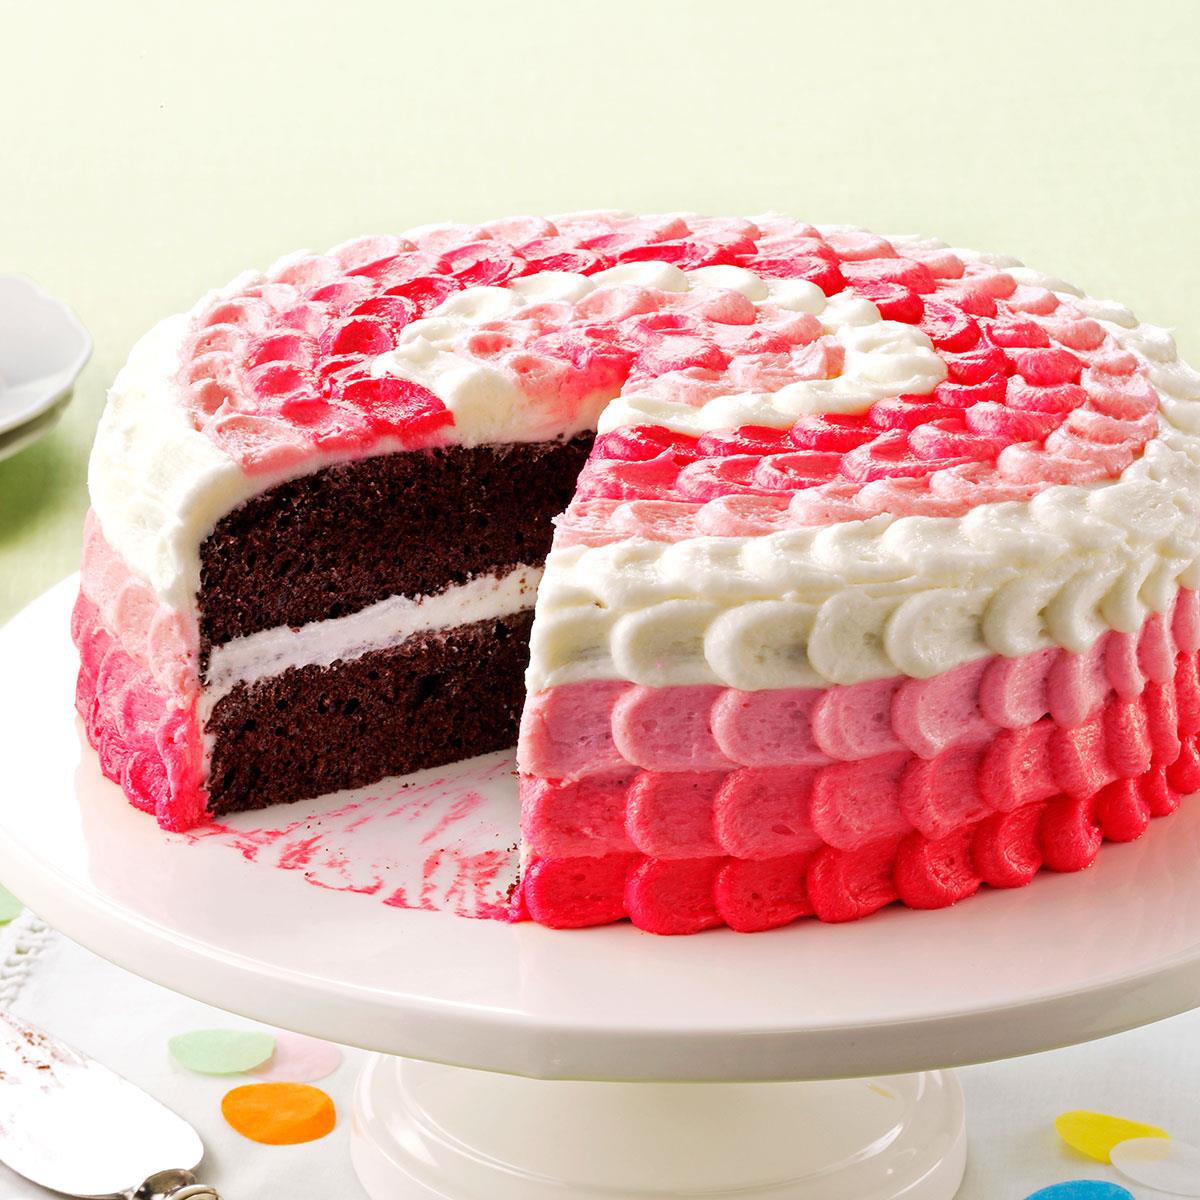 Cake Decoration Baking Supplies For Sweet Treats And Valentine's Day Party  | SHEIN USA